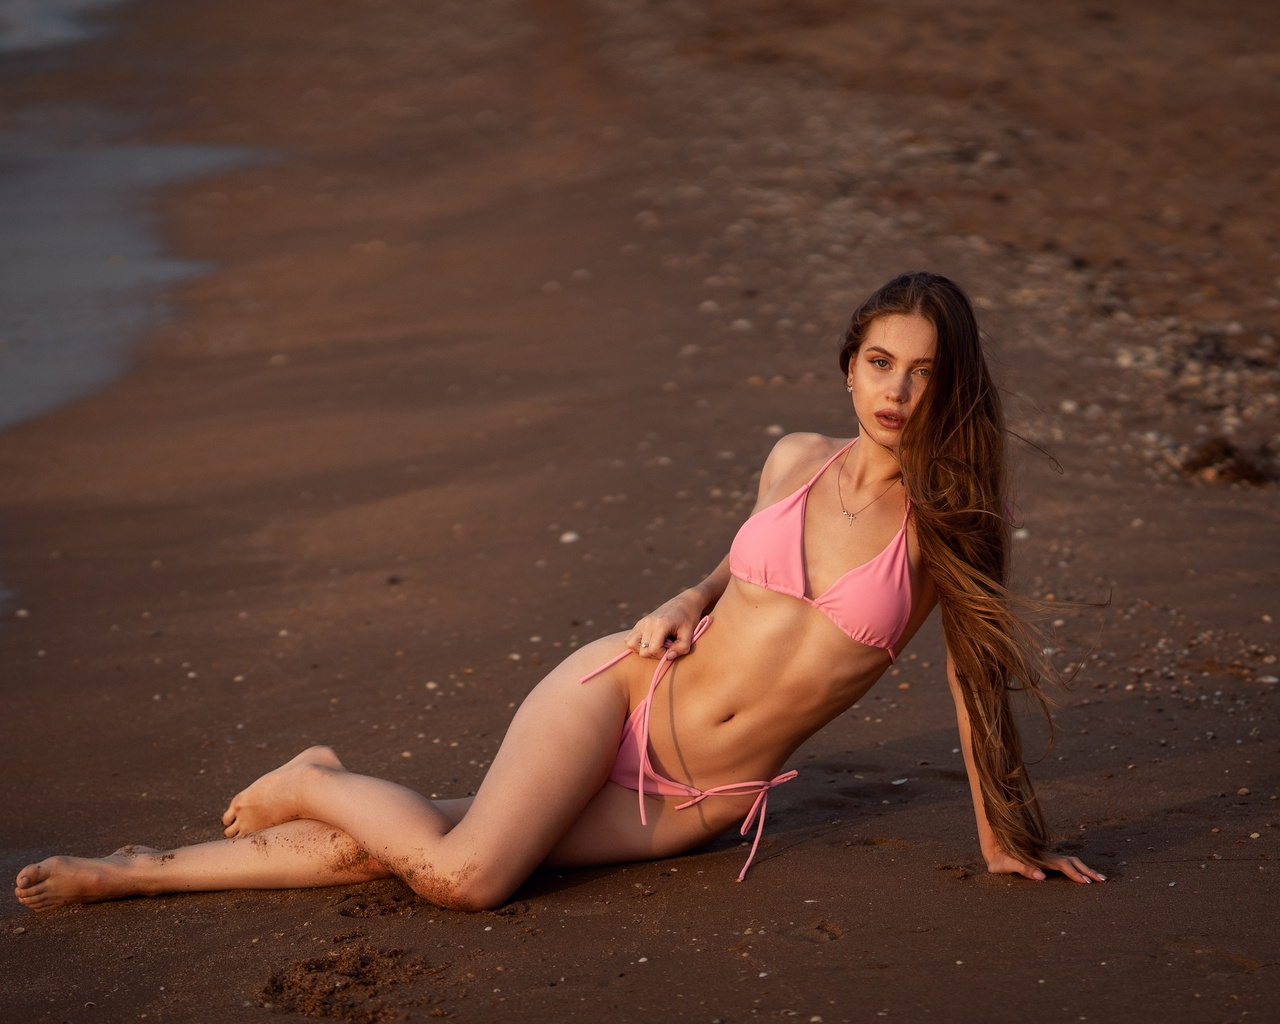 women, pink bikini, long hair, sand, sea, belly, ribs, crucifix necklace, women outdoors, hips, pink nails, sand covered body, sitting